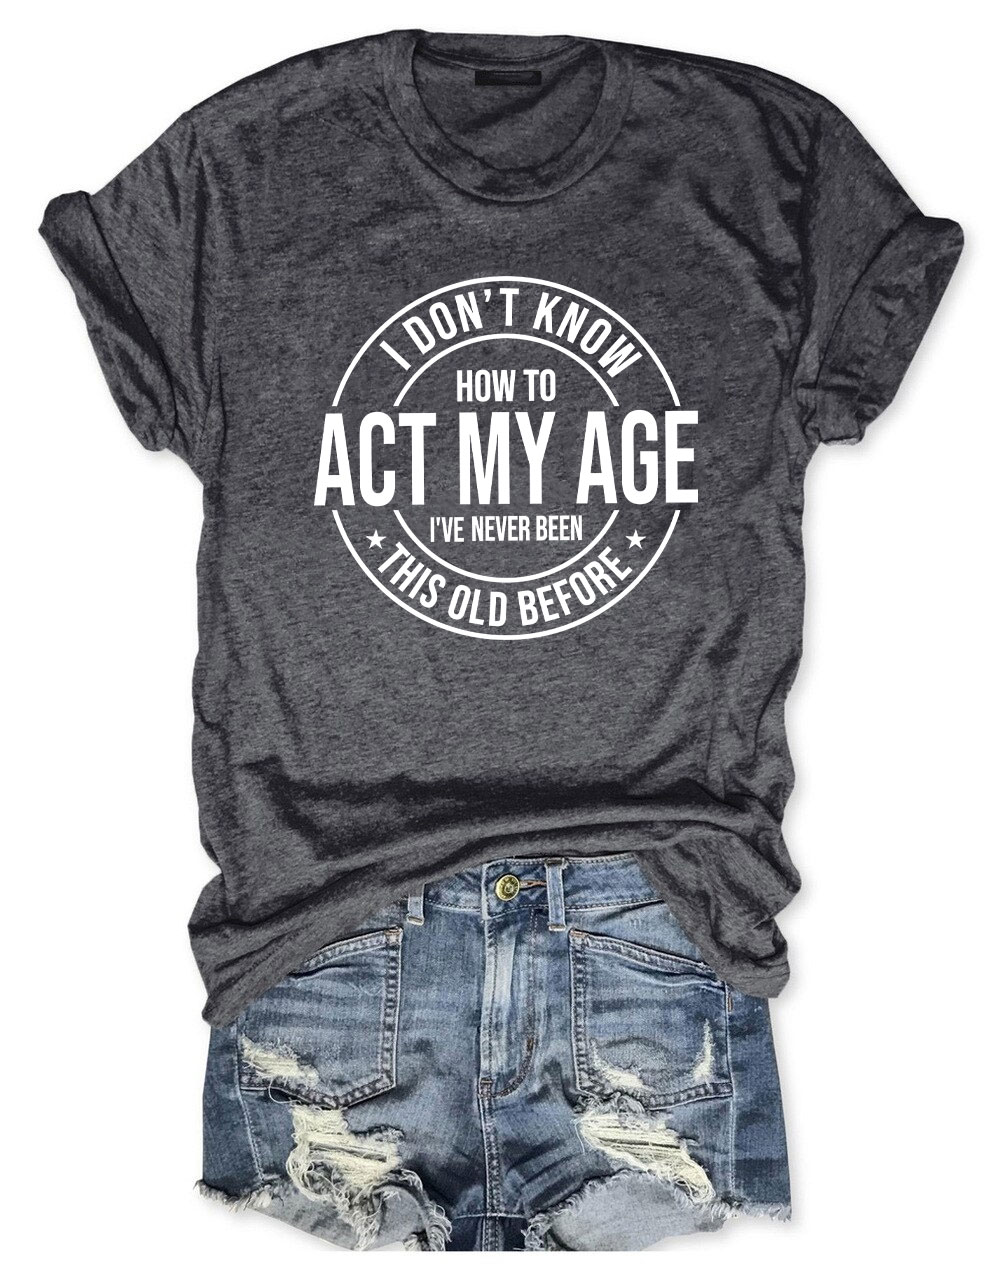 I Don't Know How To Act My Age T-shirt